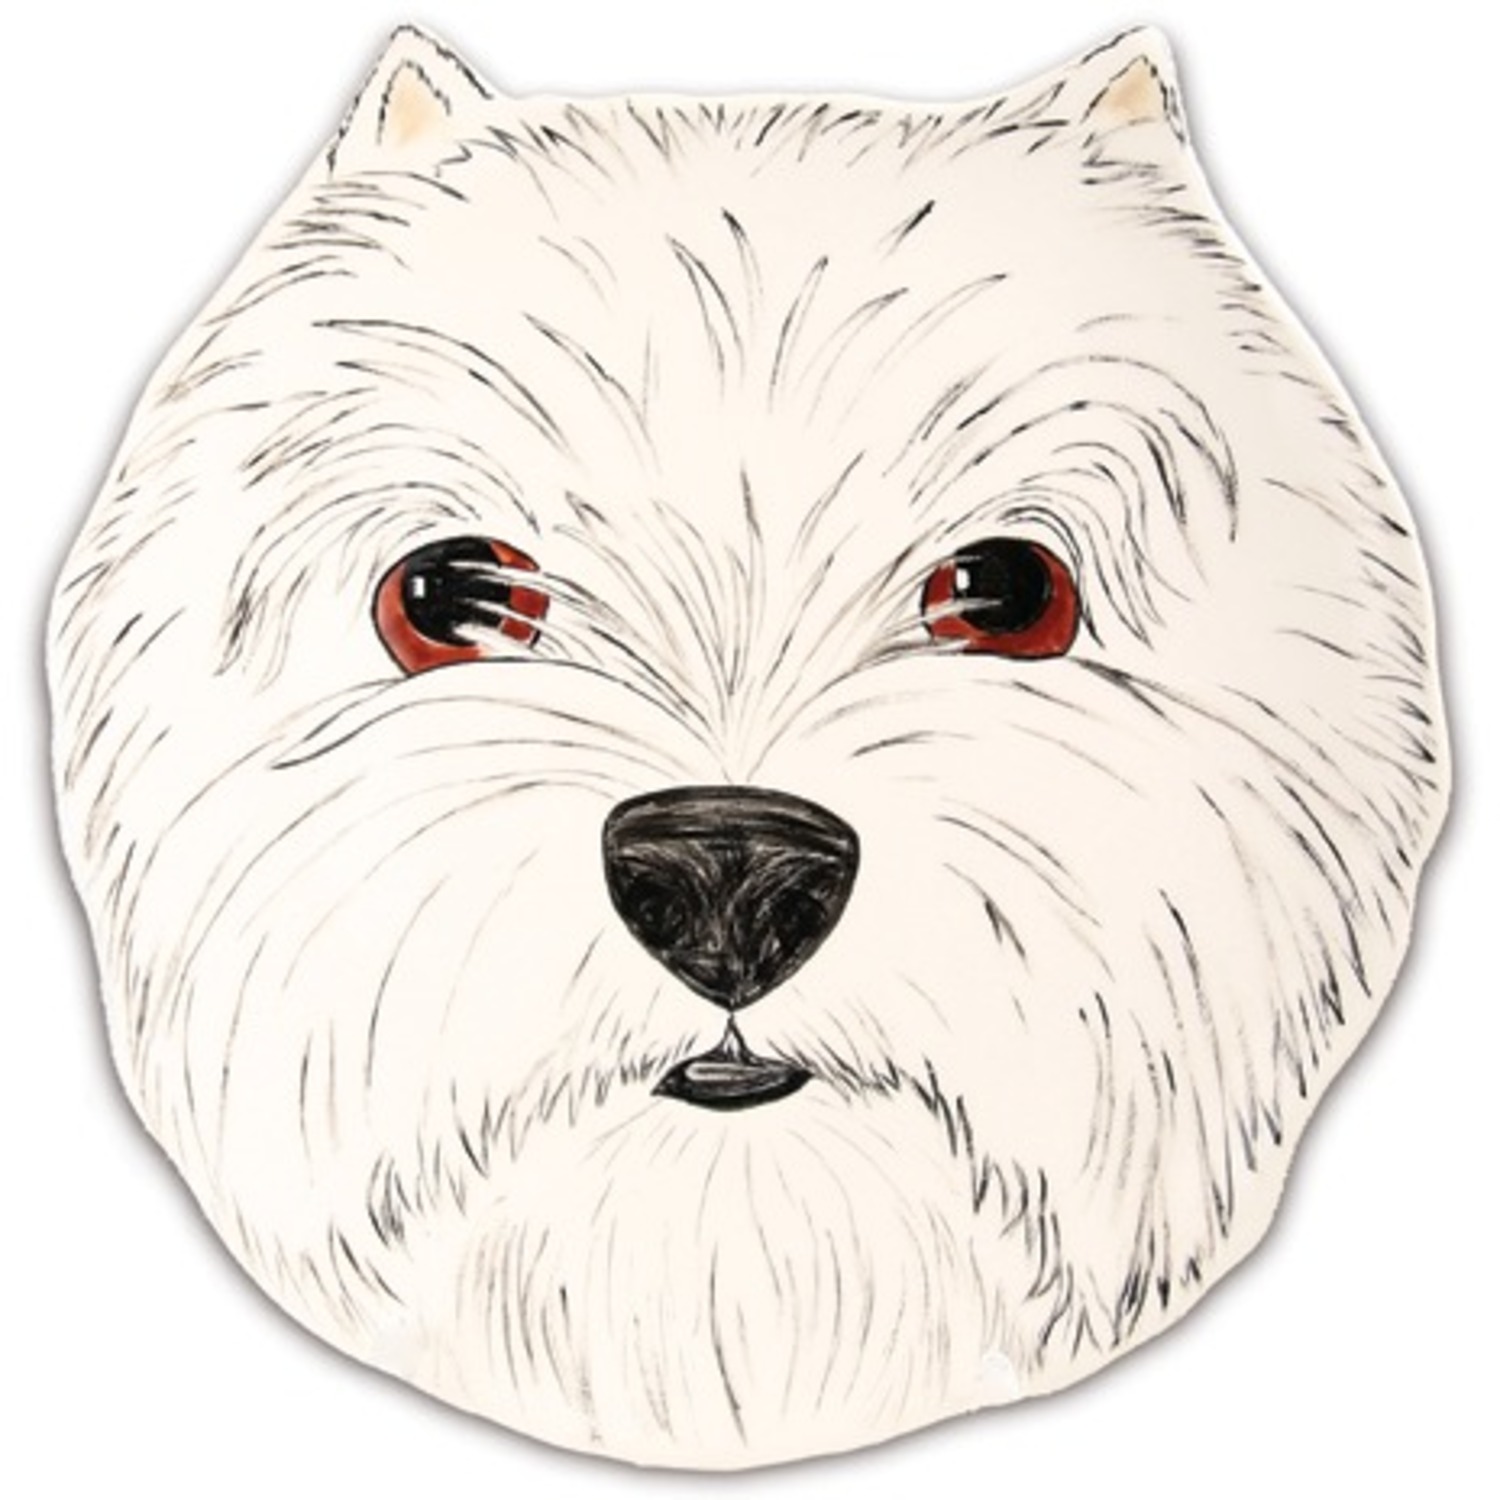 Dee Oh Gie - West Highland by Rescue Me Now - Dee Oh Gie - West Highland - 10" Dog Plate